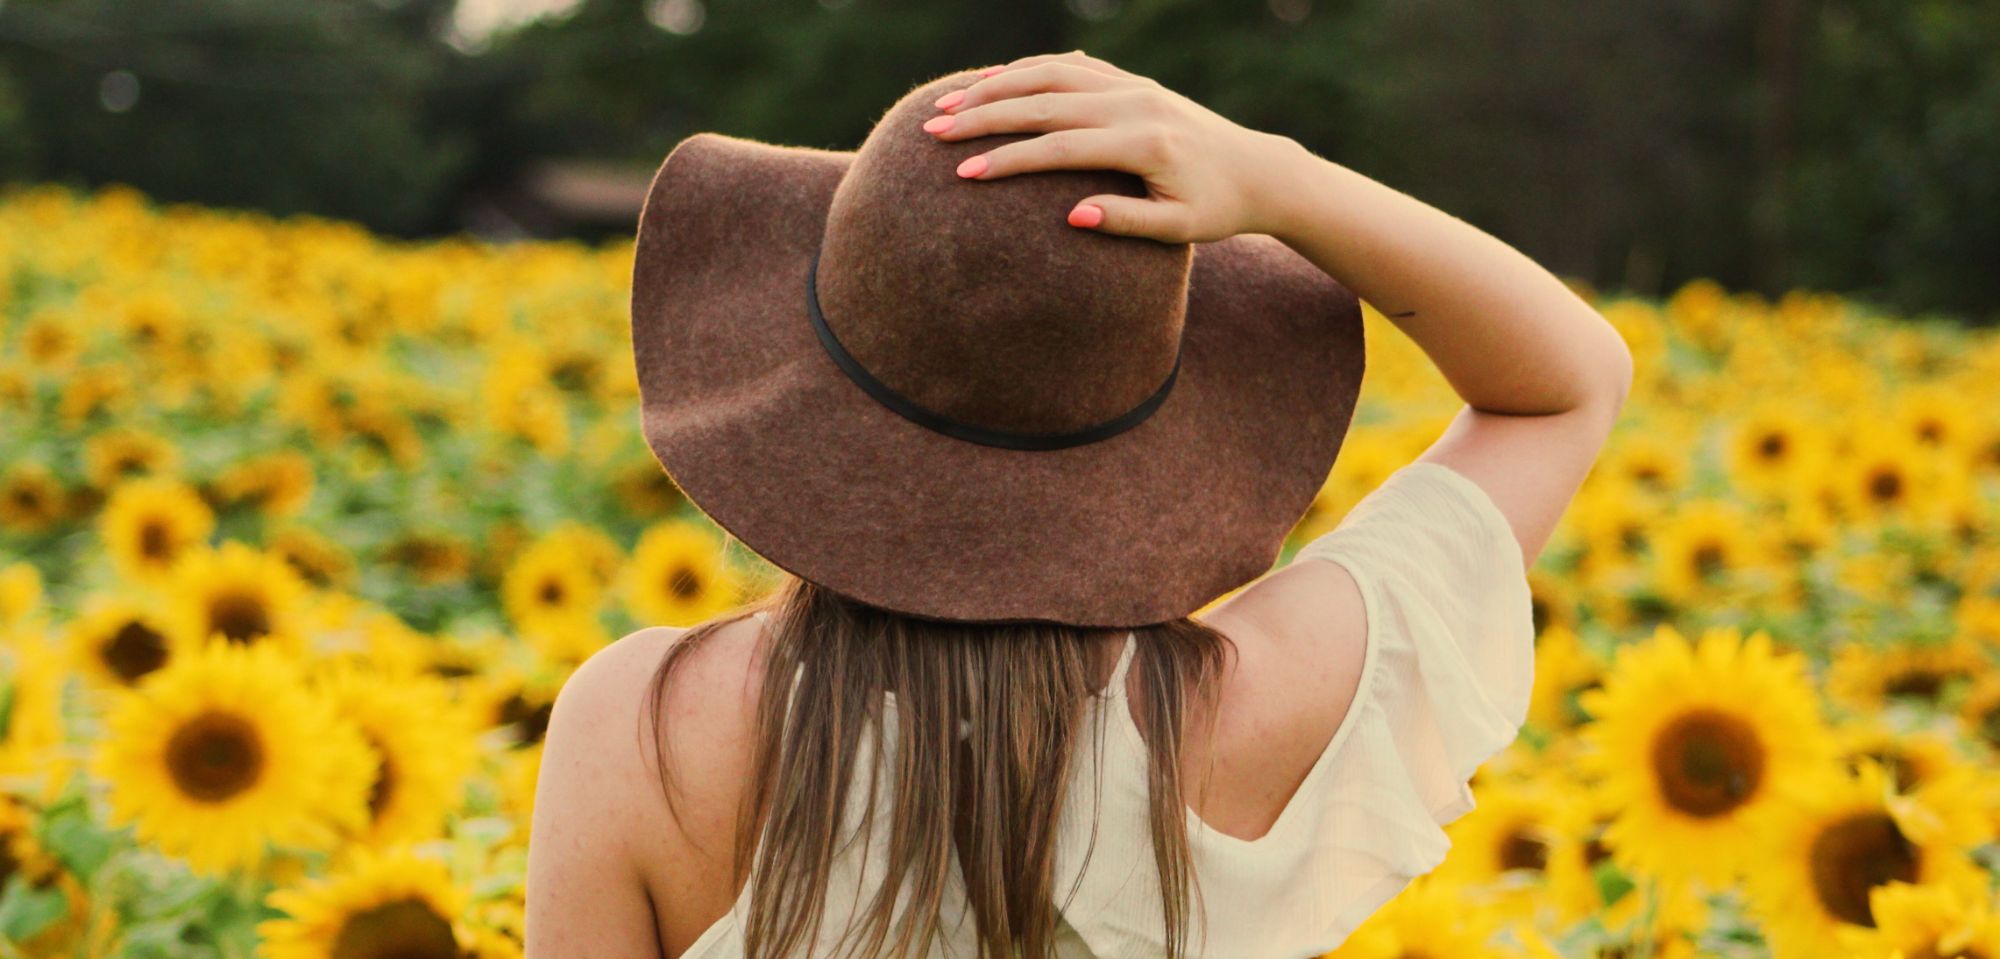 Sunflower image with hat